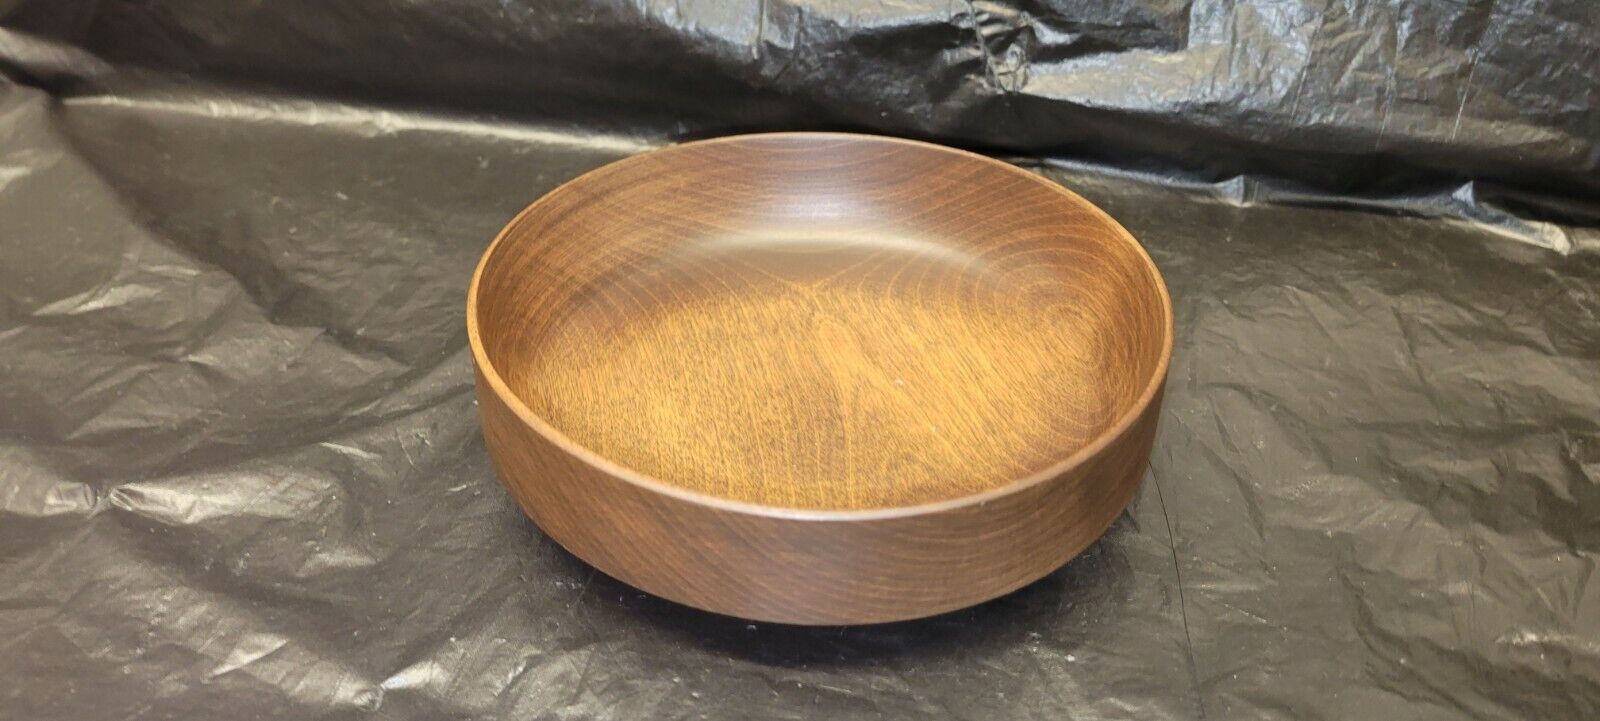 Woodbury’s Woodware hand turned bowl Vermont 